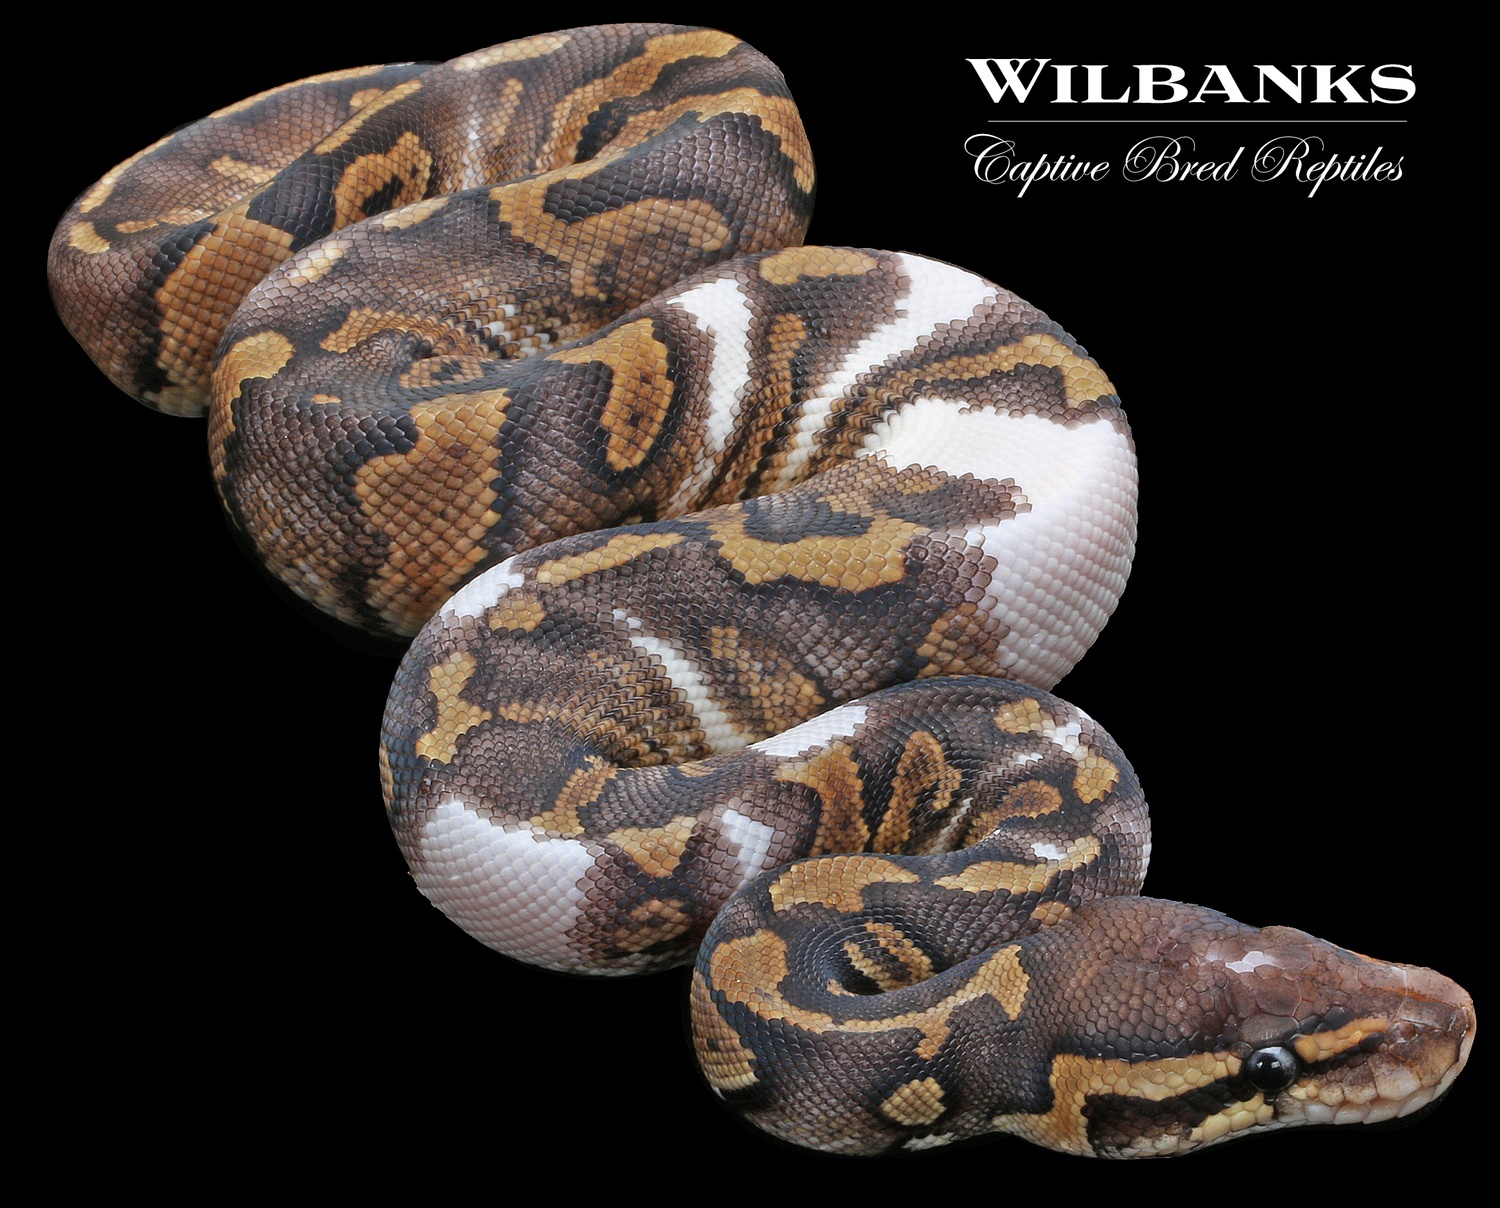 Mojave GHI Fire (Paradox) Ball Python by Wilbanks Captive Bred Reptiles